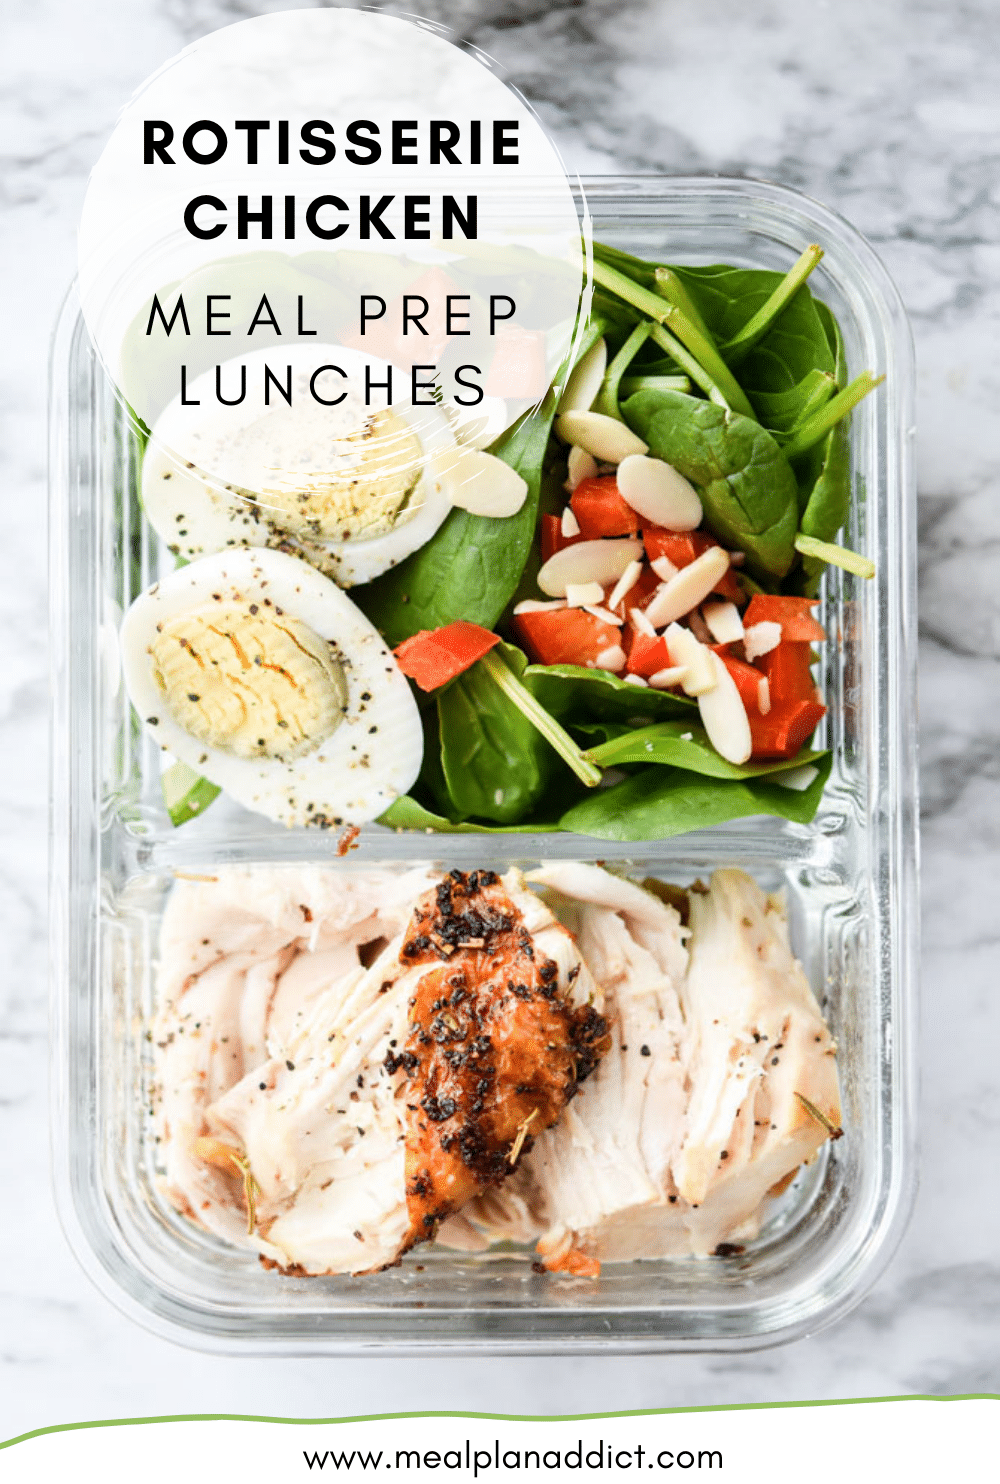 Rotisserie Chicken Meal Prep Lunches